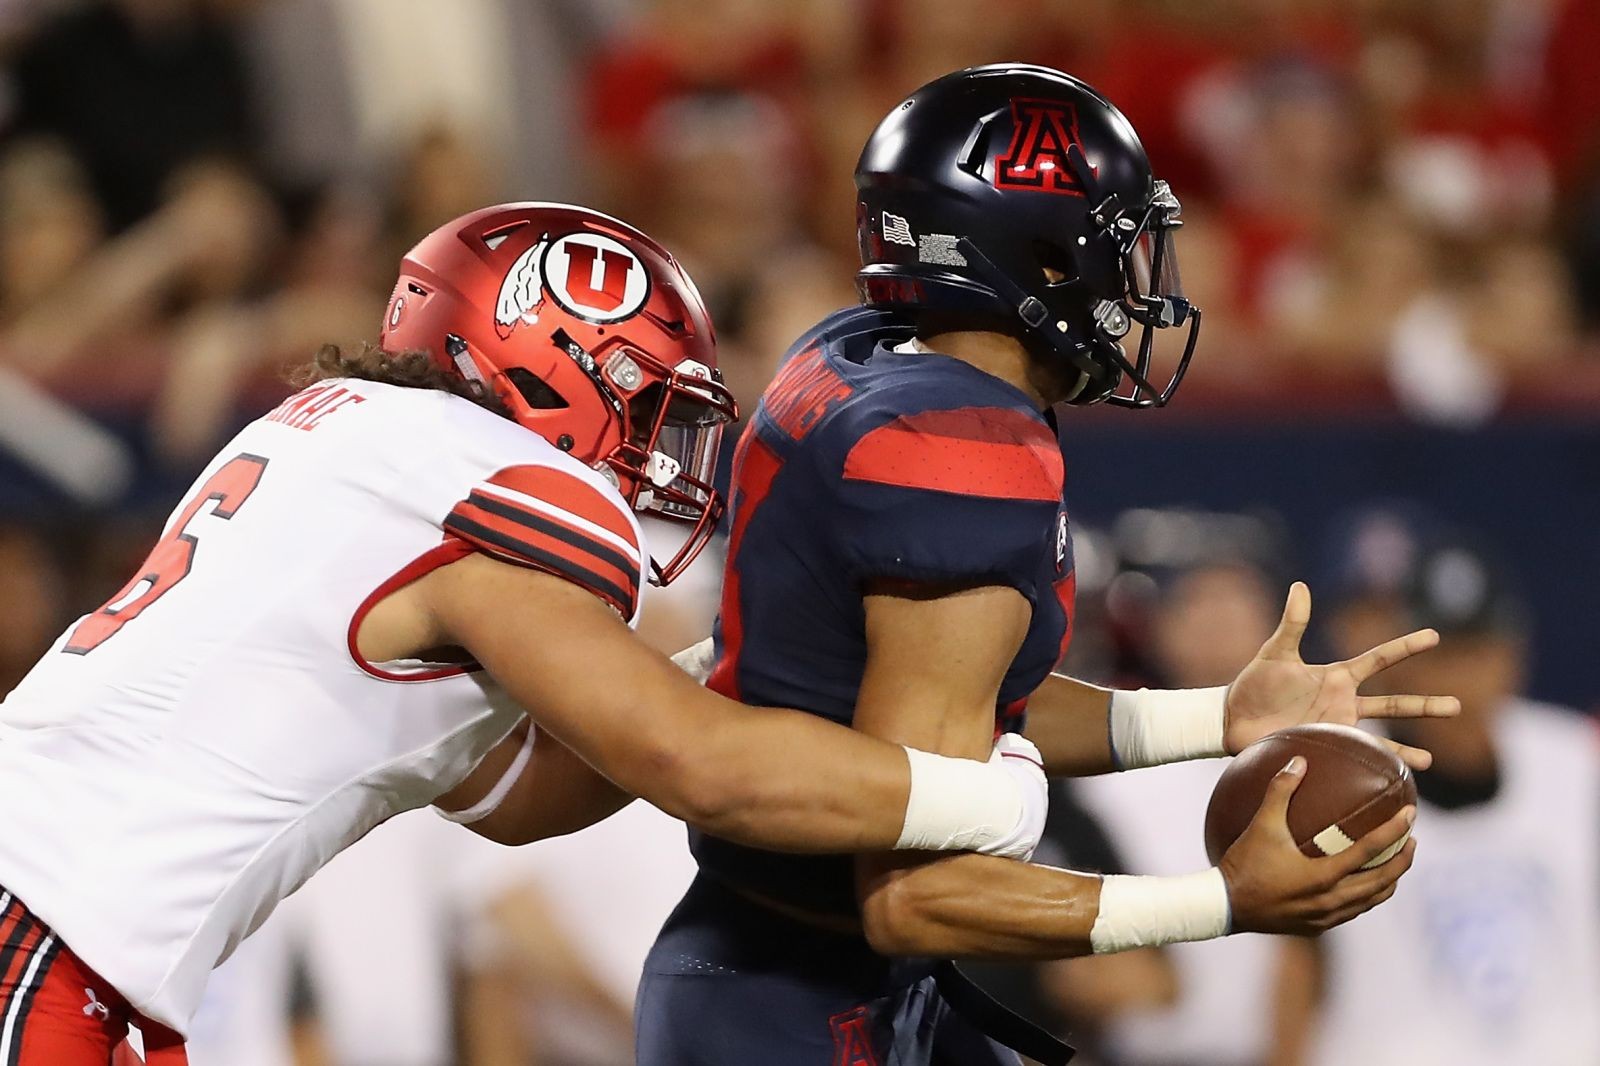 USC vs. Utah preview 2019: Which units have the edge?